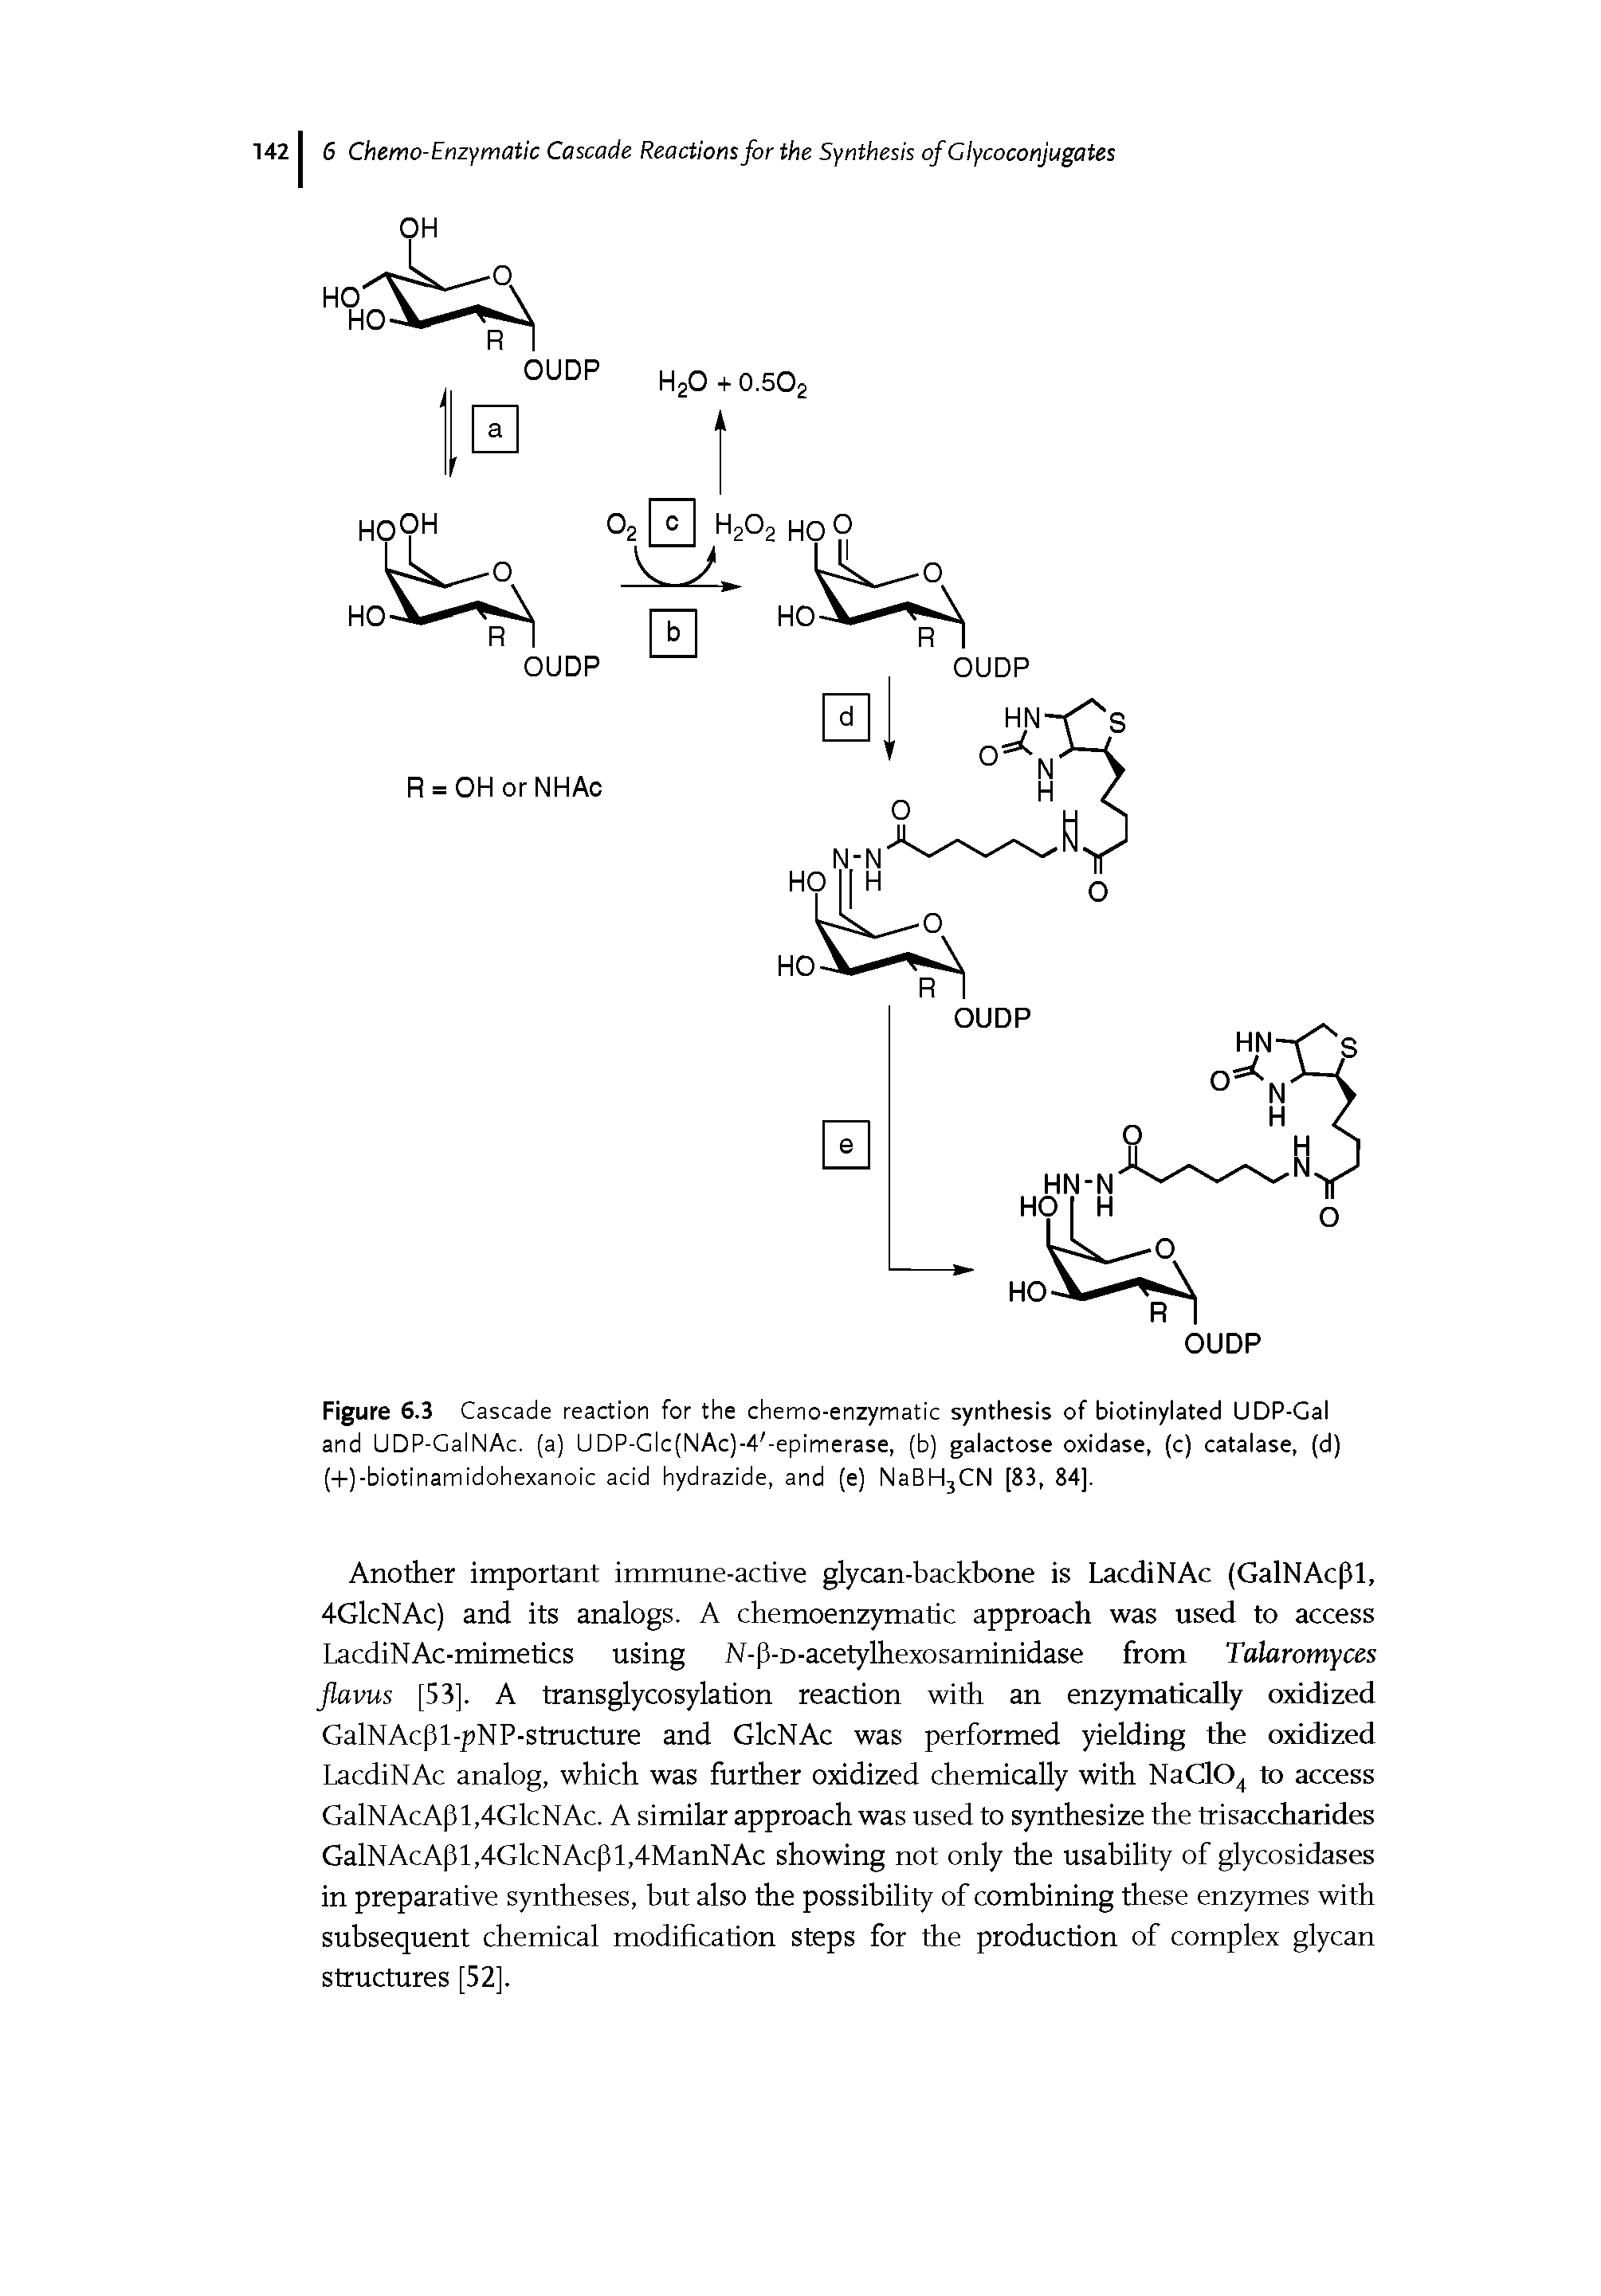 Figure 6.3 Cascade reaction for the chemo-enzymatic synthesis of biotinylated UDP-Cal and UDP-GalNAc. (a) UDP-Glc(NAc)-4 -epimerase, (b) galactose oxidase, (c) catalase, (d)...